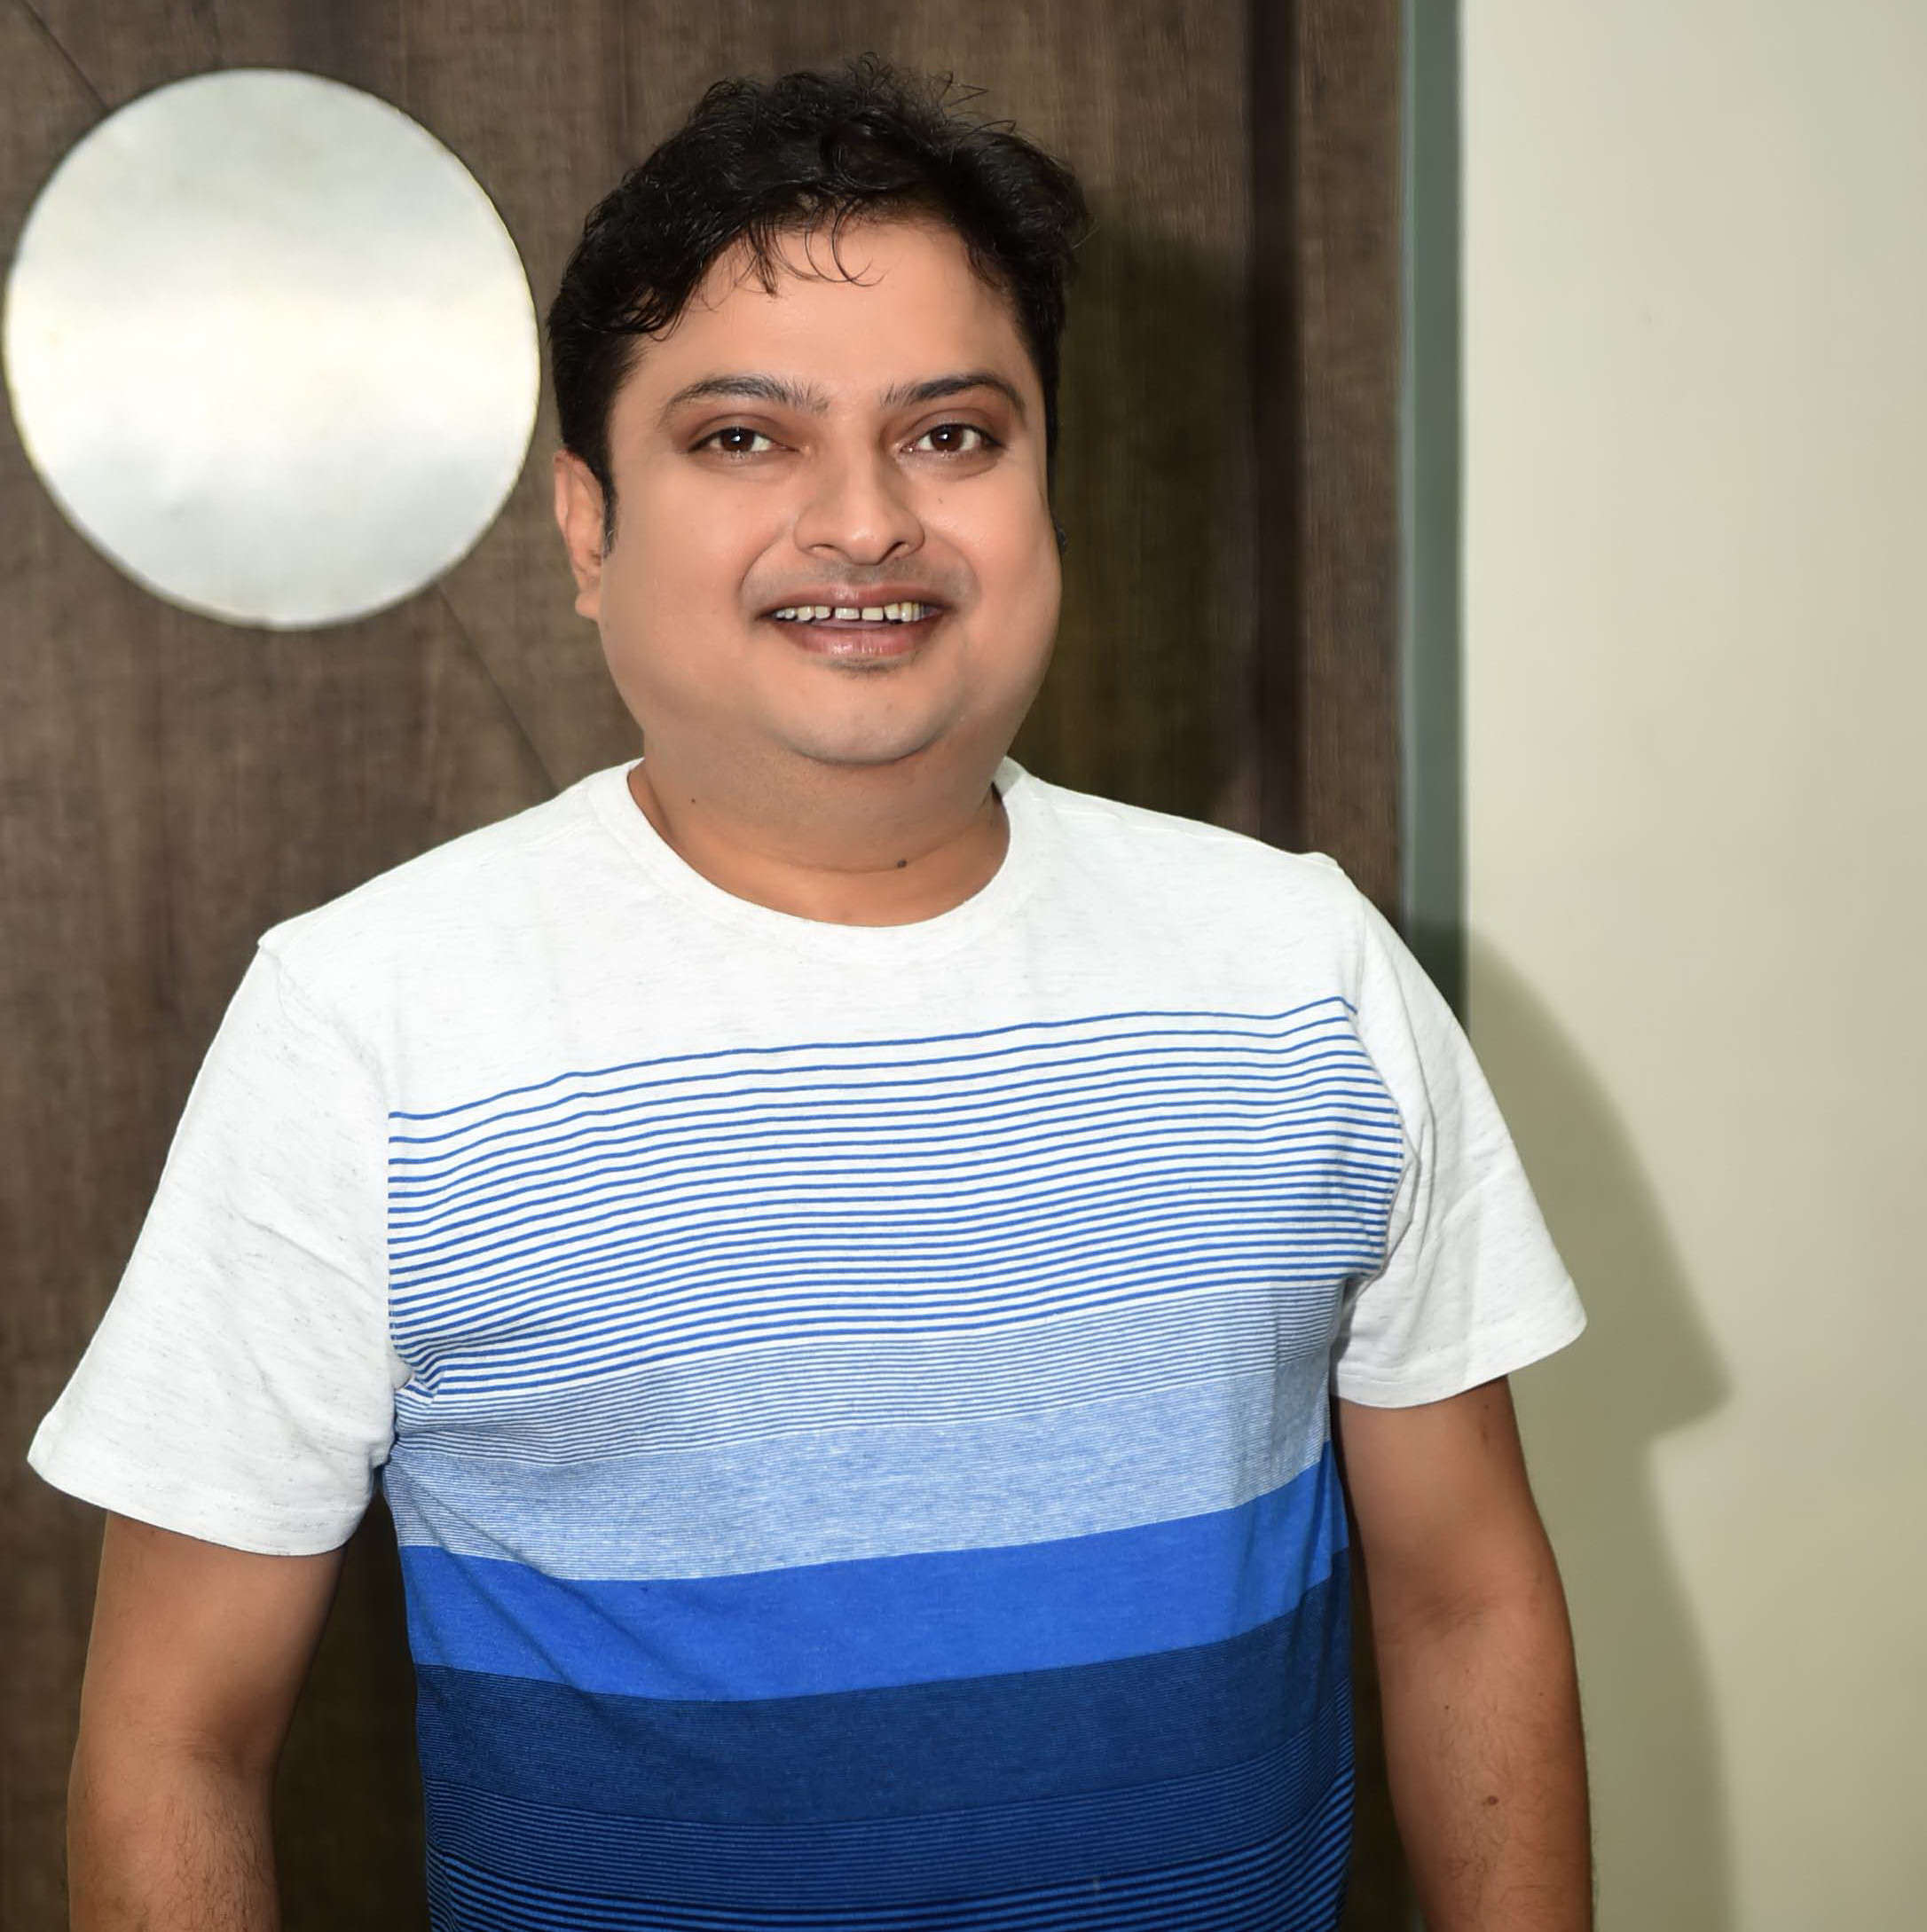 The audience and industry have accepted me with open arms: Biswanath Basu | Bengali Movie News - Times of India